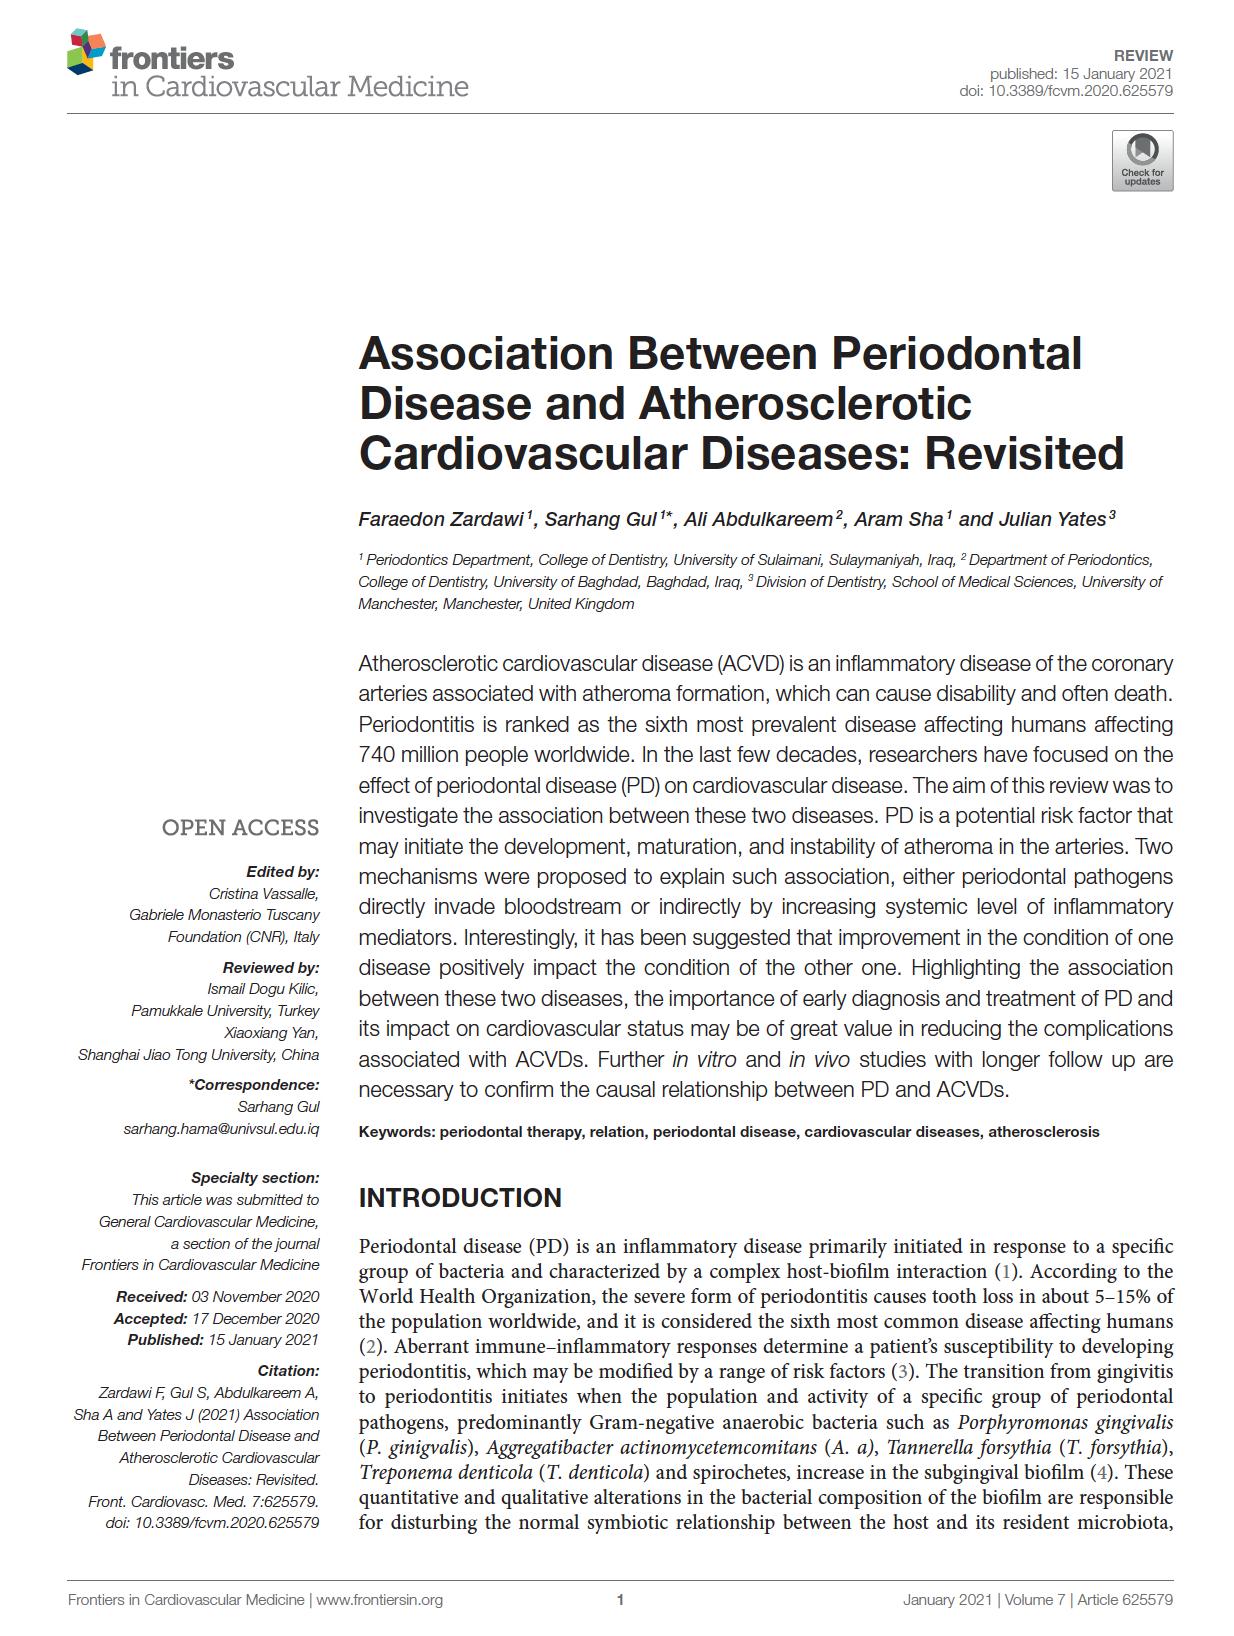 Association Between Periodontal Disease and Atherosclerotic Cardiovascular Diseases: Revisited